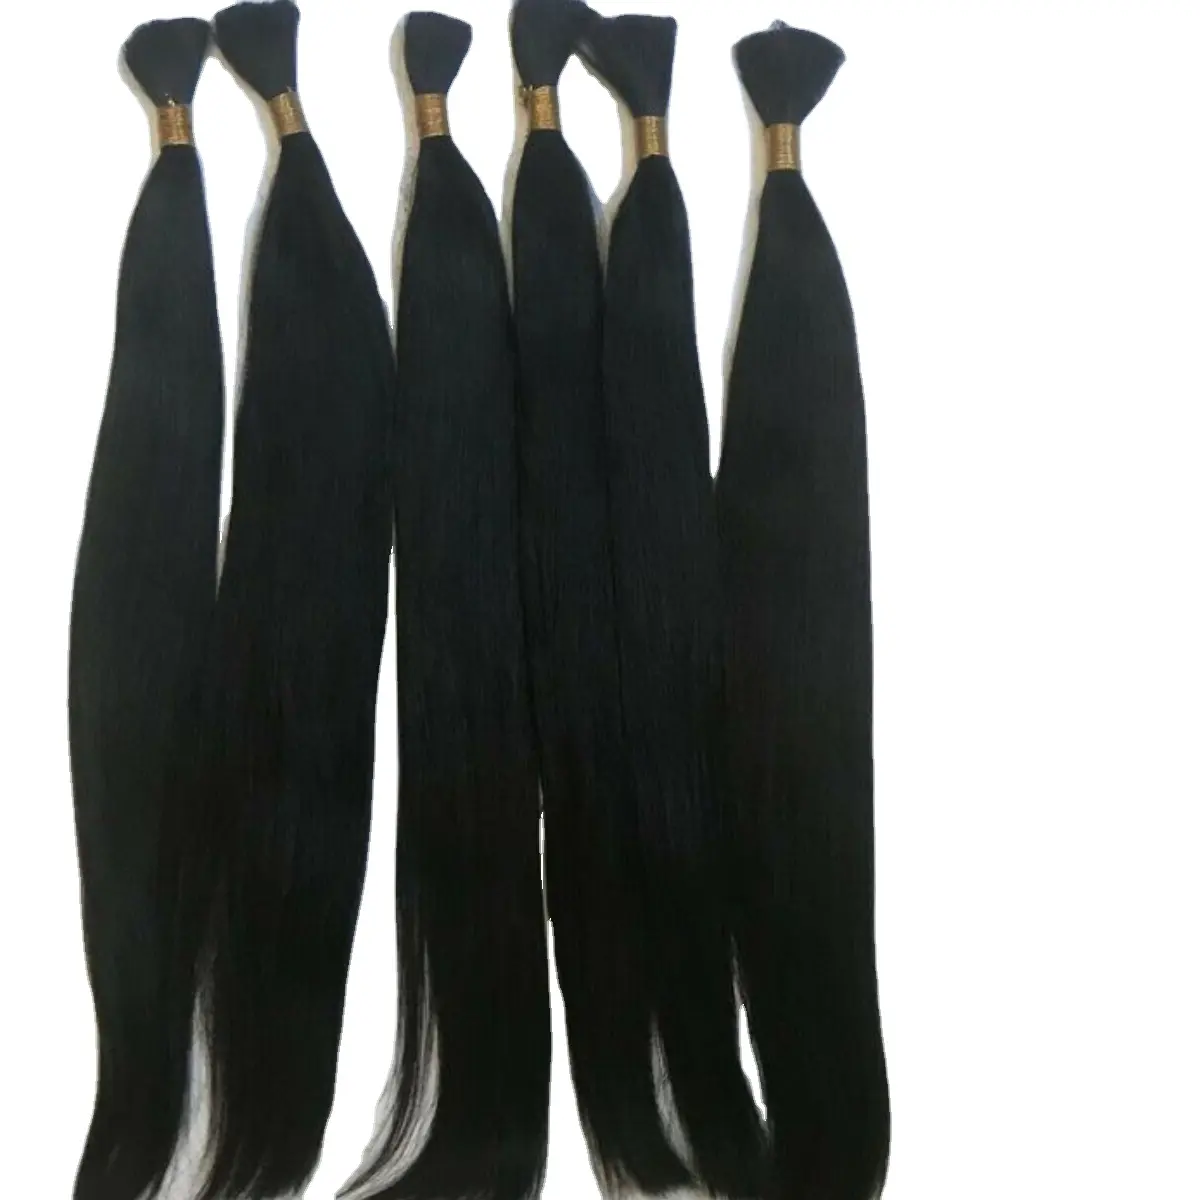 60cm Length Raw Vietnamese Hair Straight Bulk Human Hair Extension Good for Wholesalers with special quality and remarkable